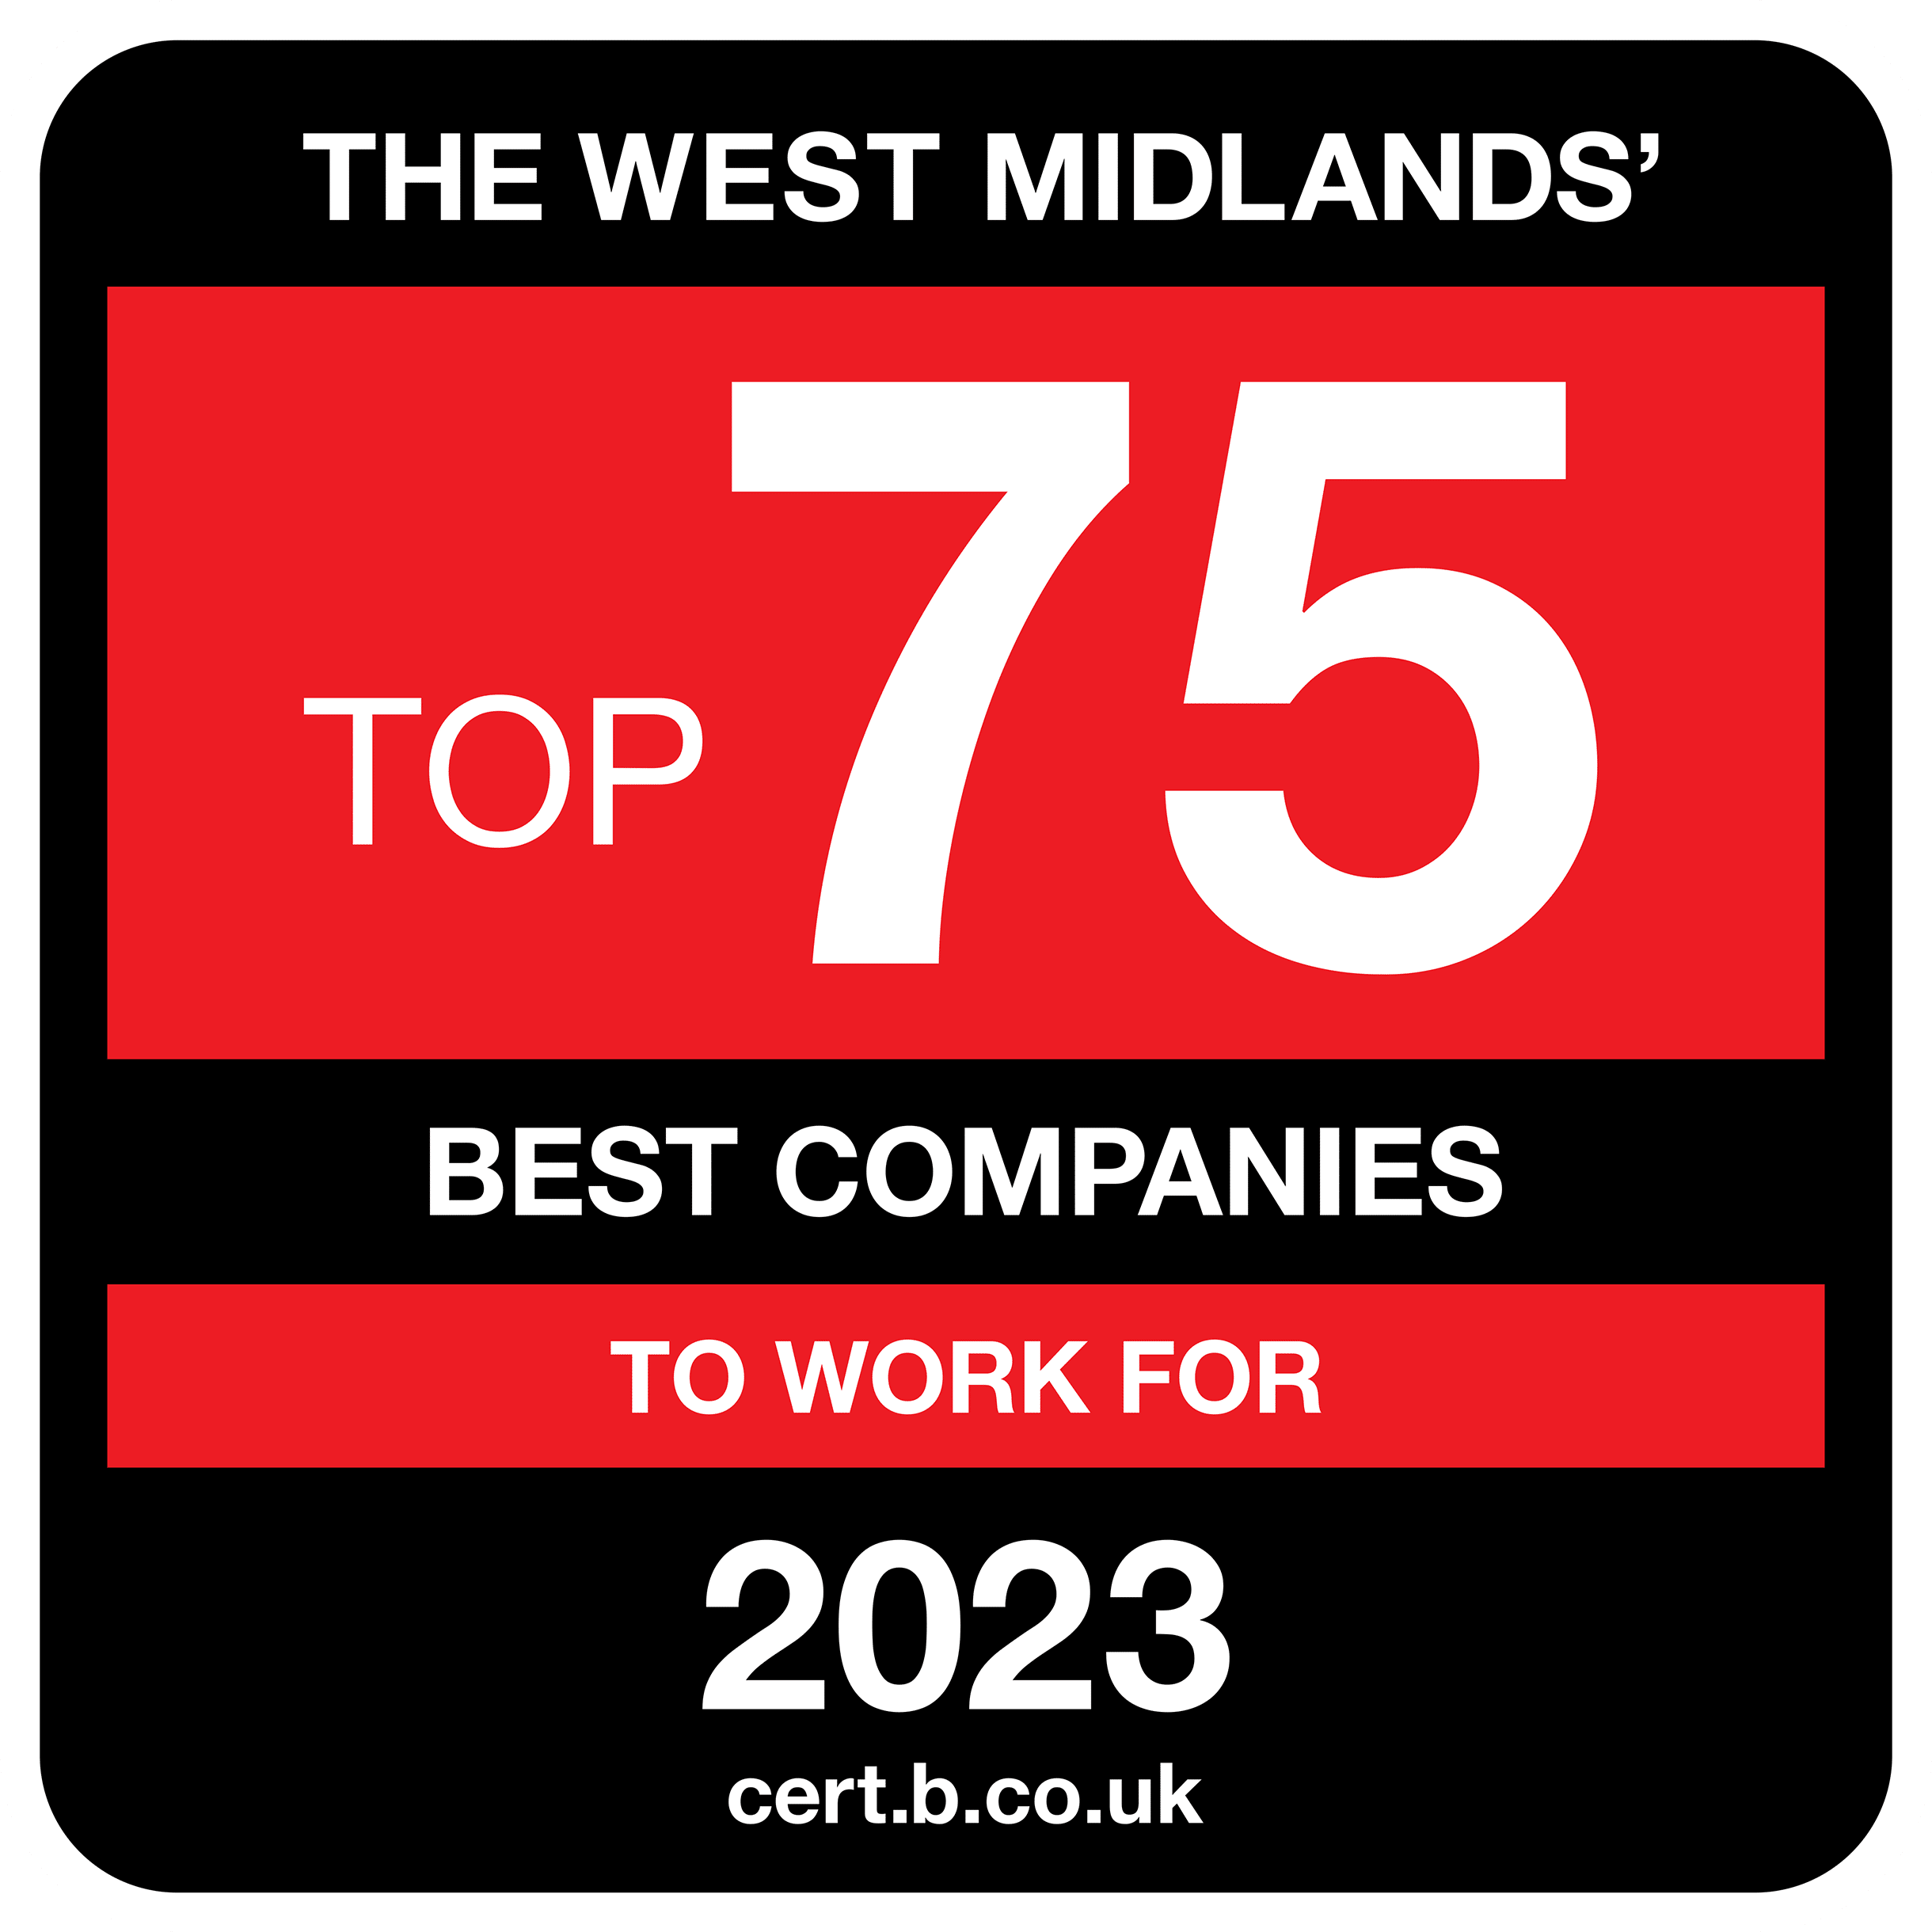 The West Midland's Top 75 Best Companies to work for 2023